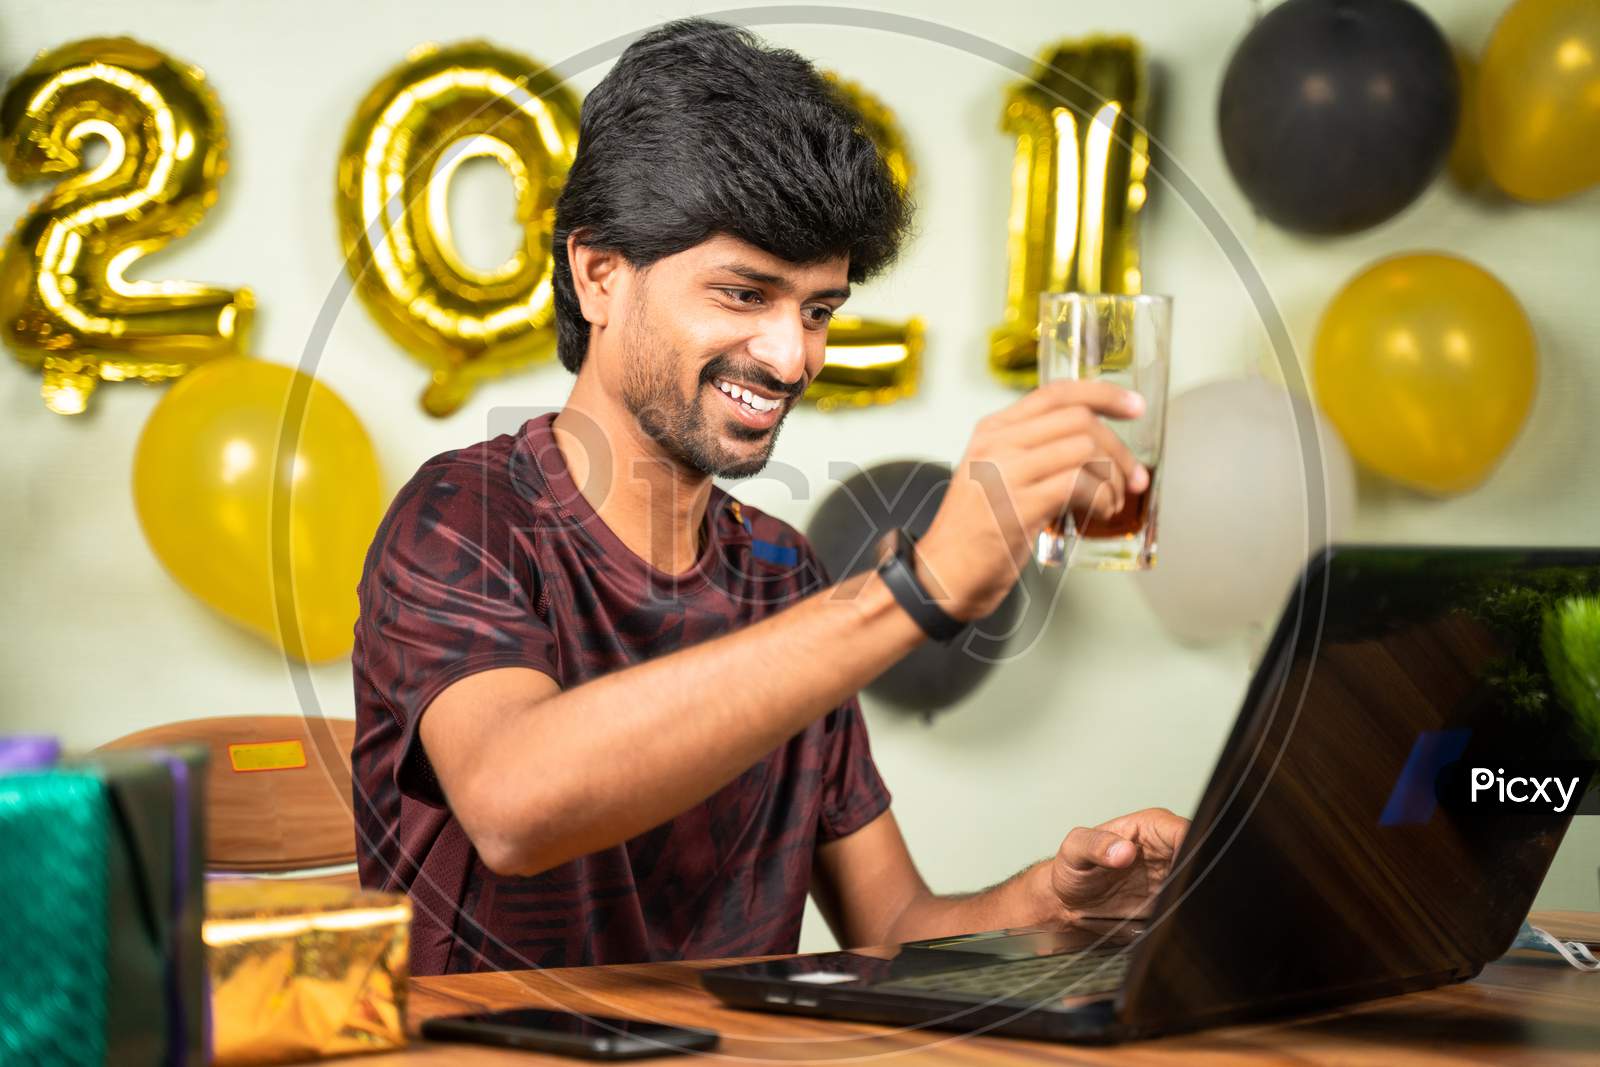 Young Man Partying During New Year Or Christmas Celebration Video Call On Laptop - Concept Of Distant Holyday Celebration Due To Coronavirus Or Covid-19 Pandemic.